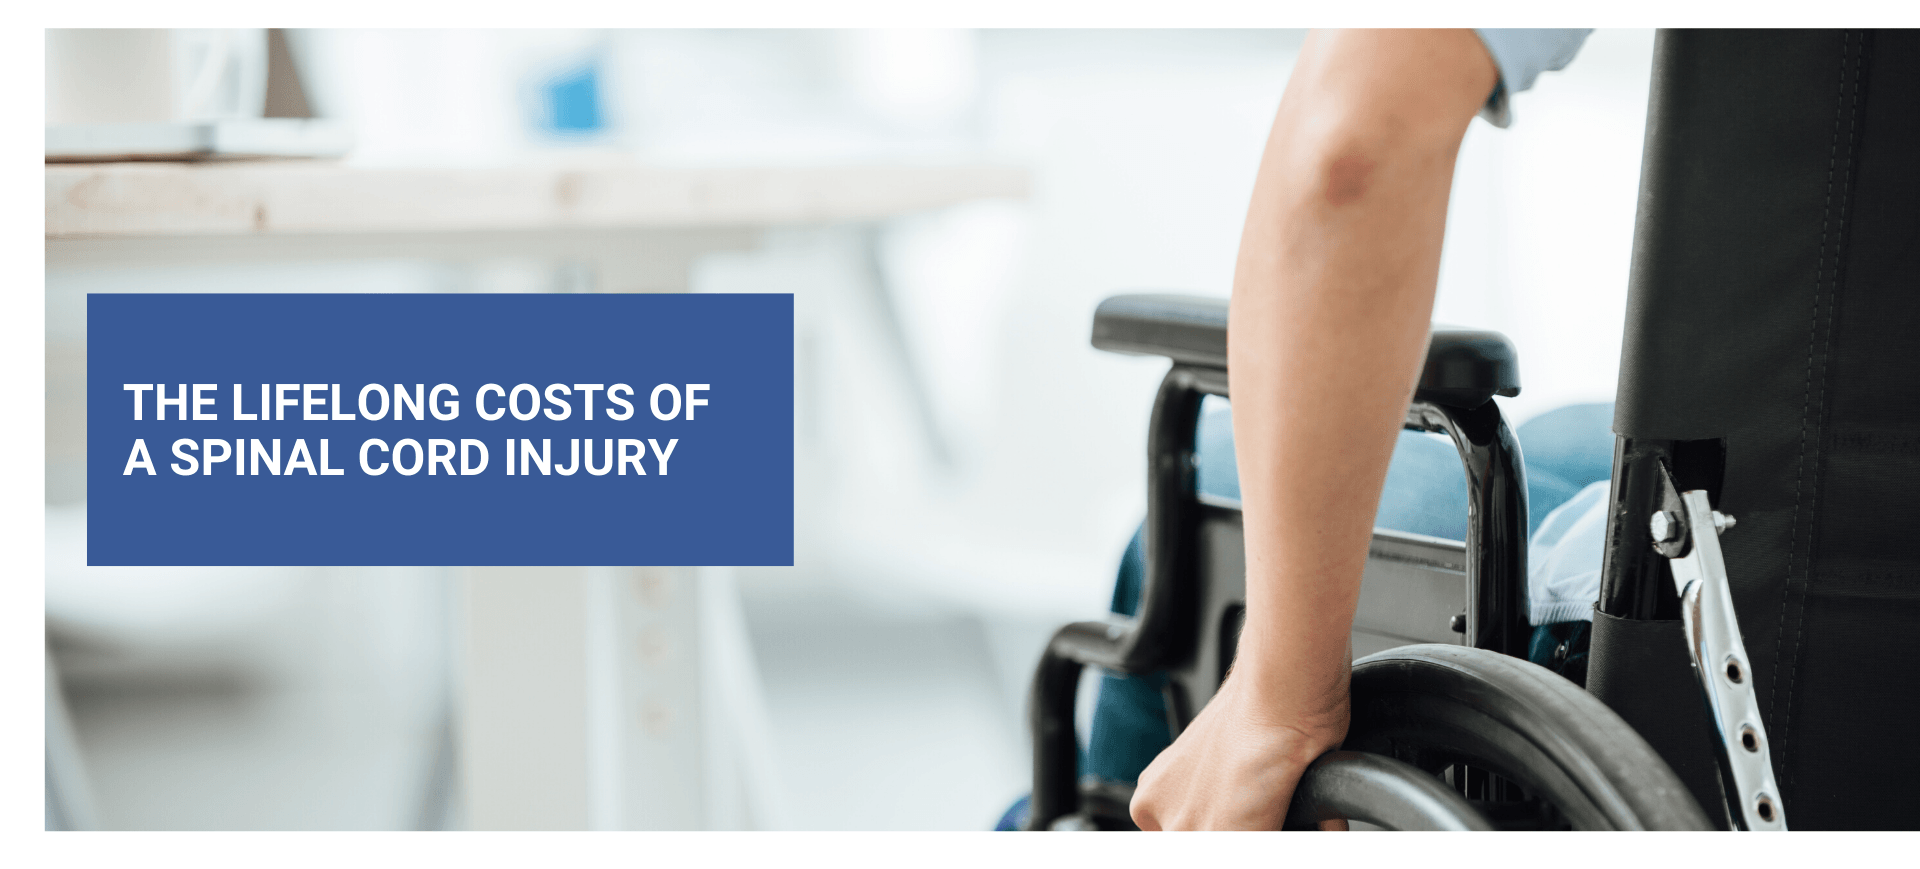 The Lifelong Costs of a Spinal Cord Injury